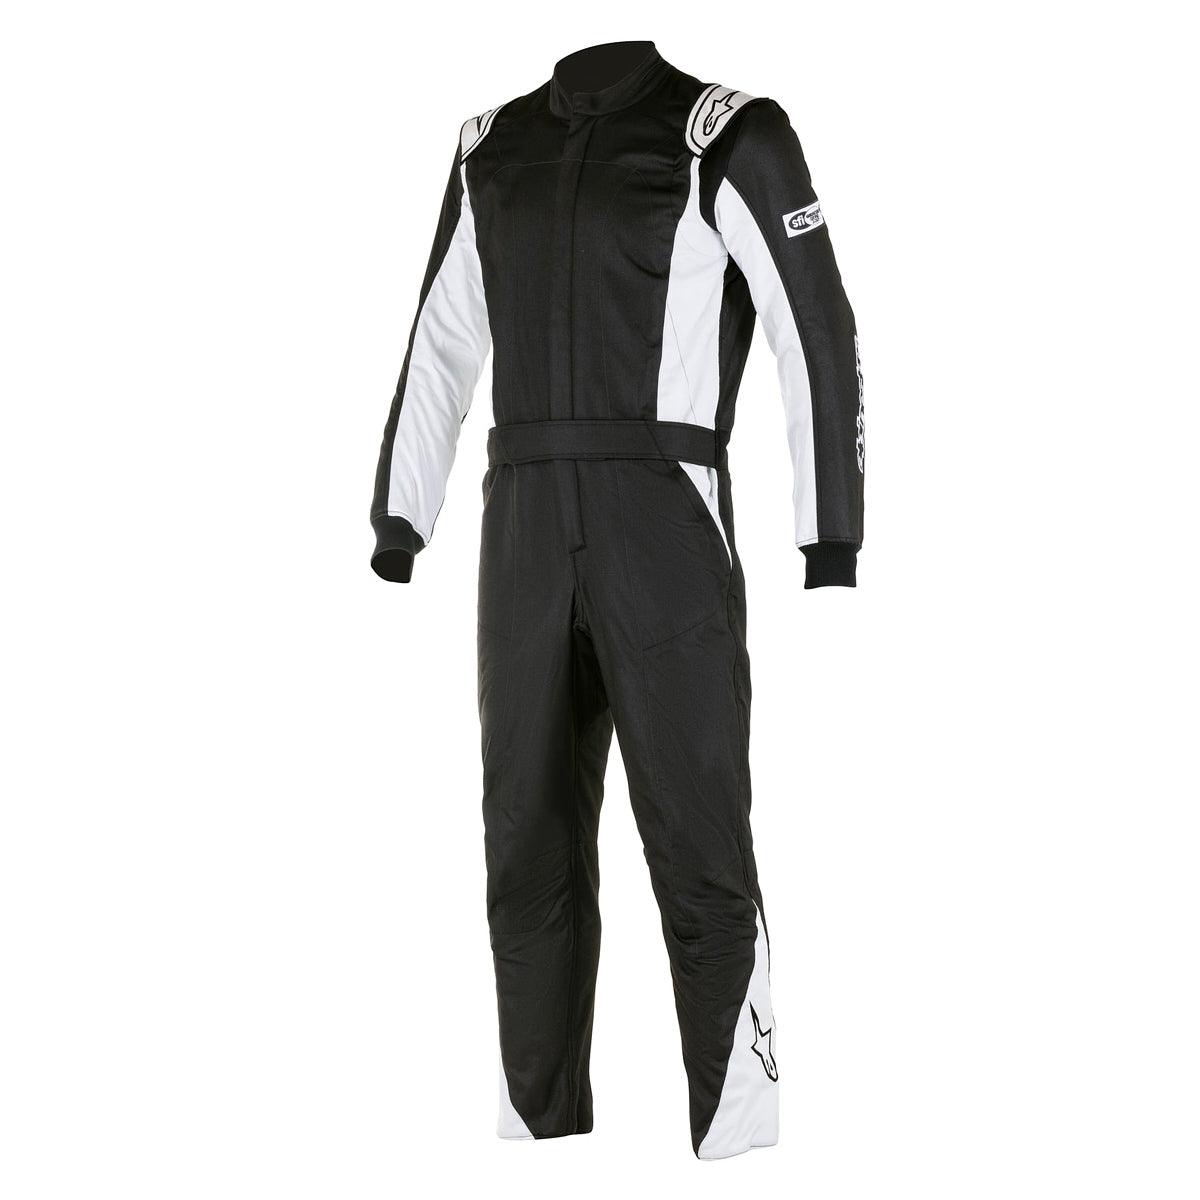 Suit Atom Black / Silver Small - Burlile Performance Products